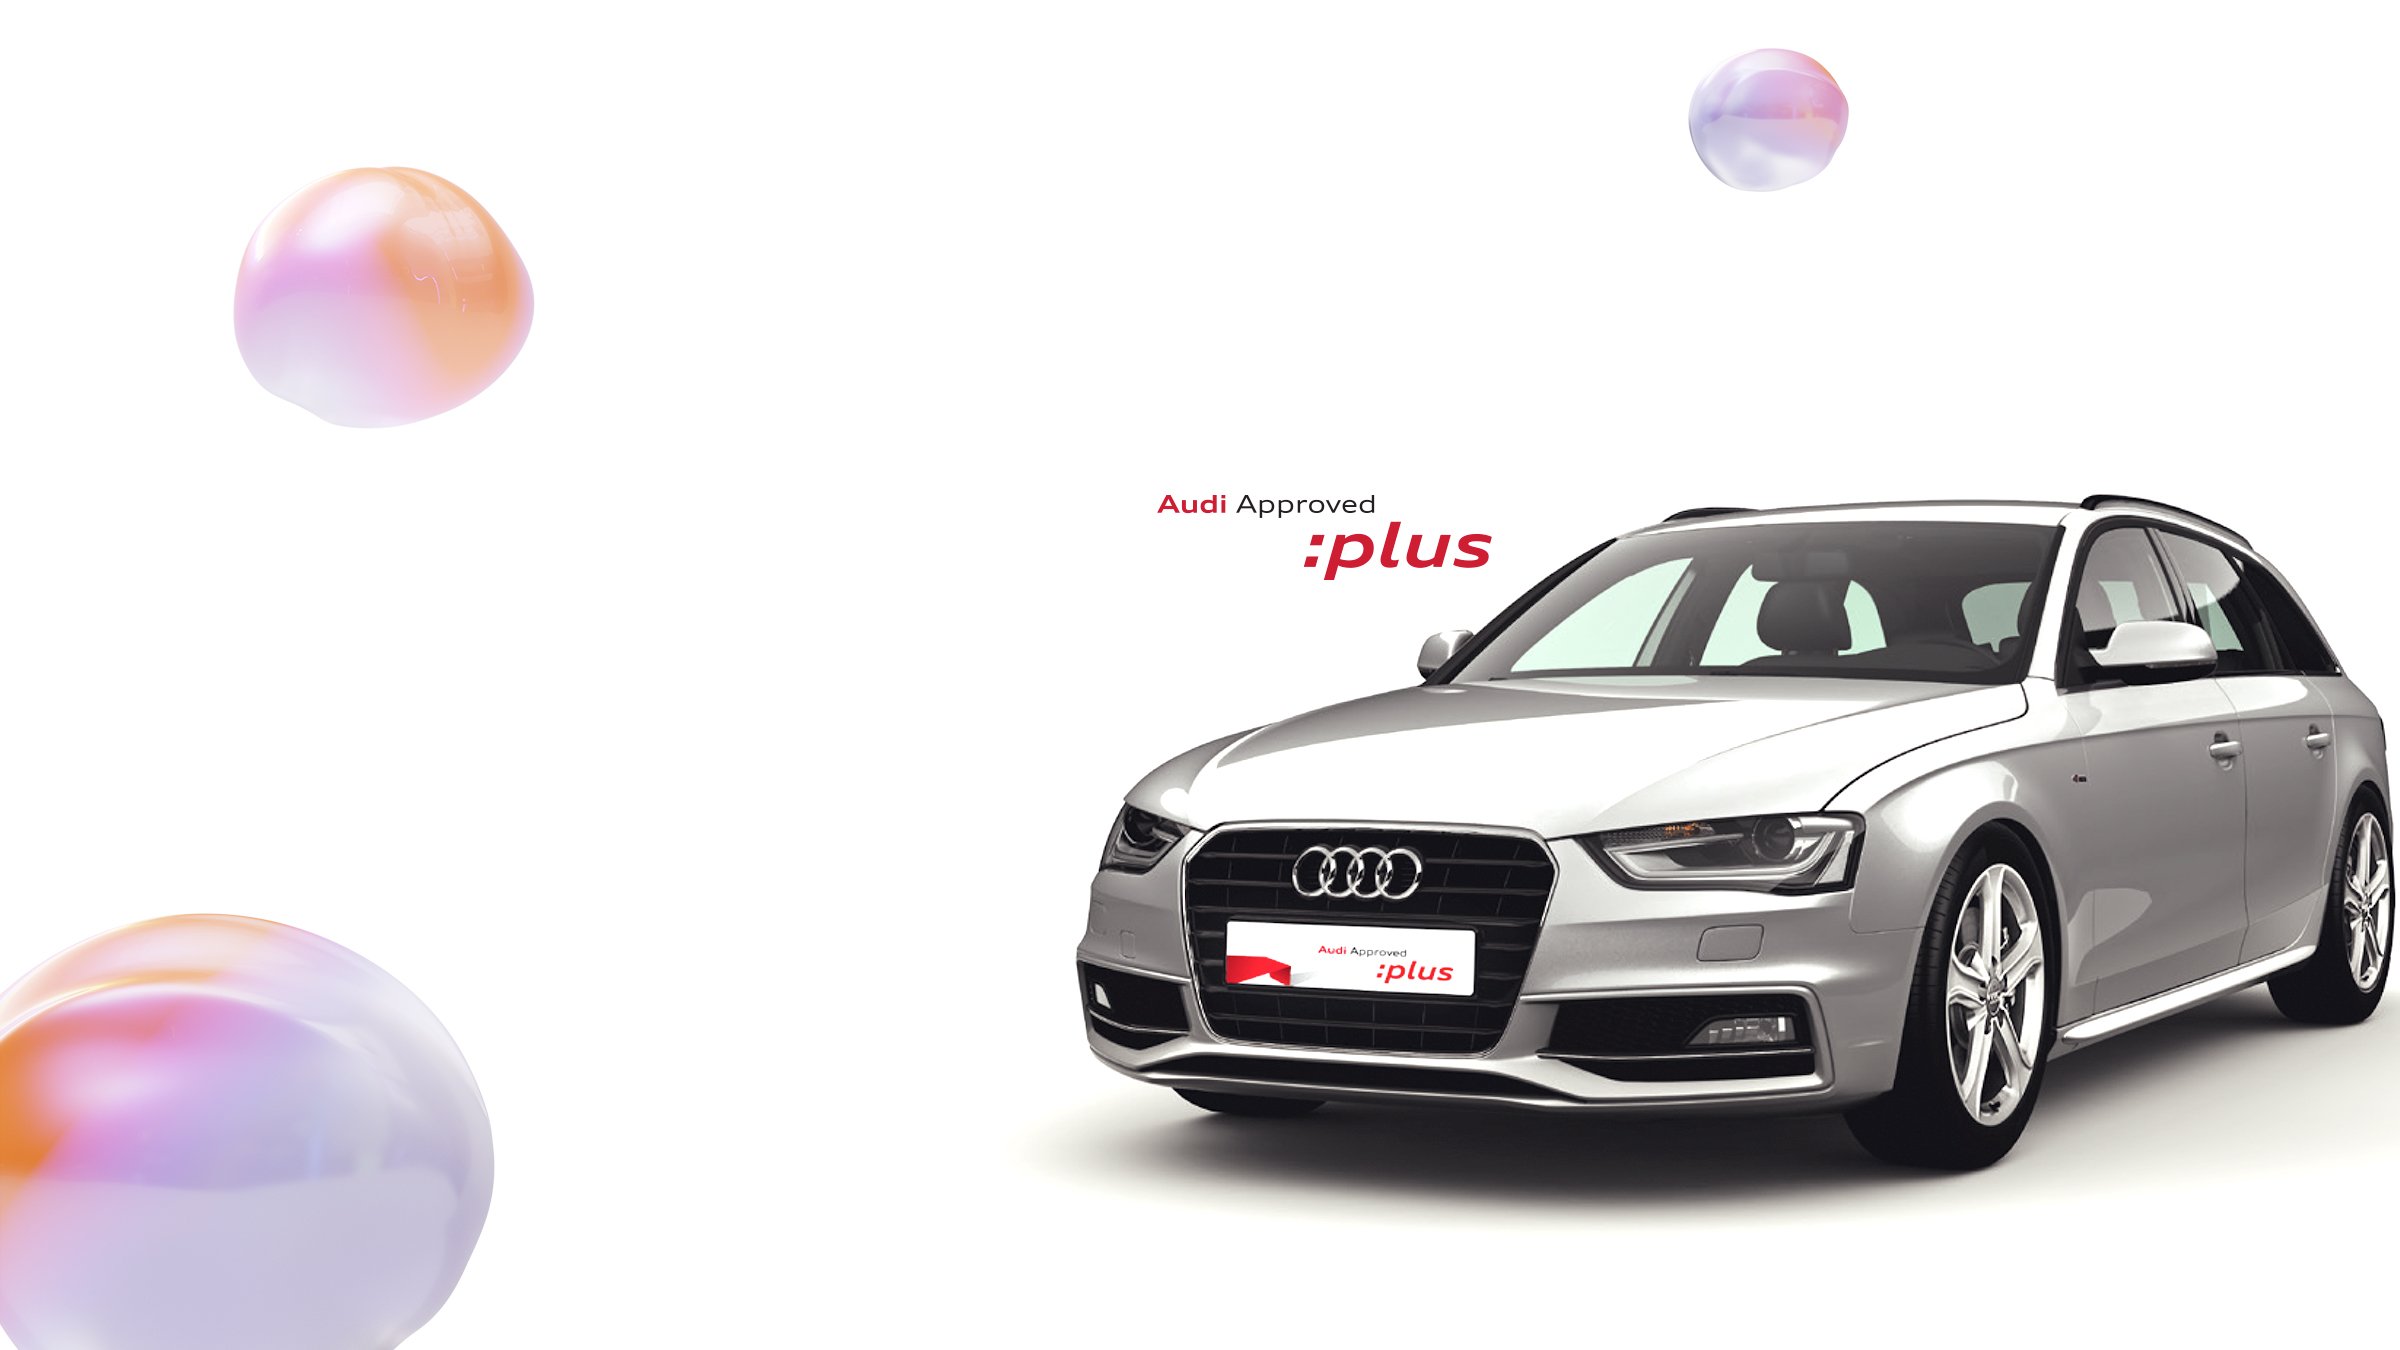  Audi Approved :plus